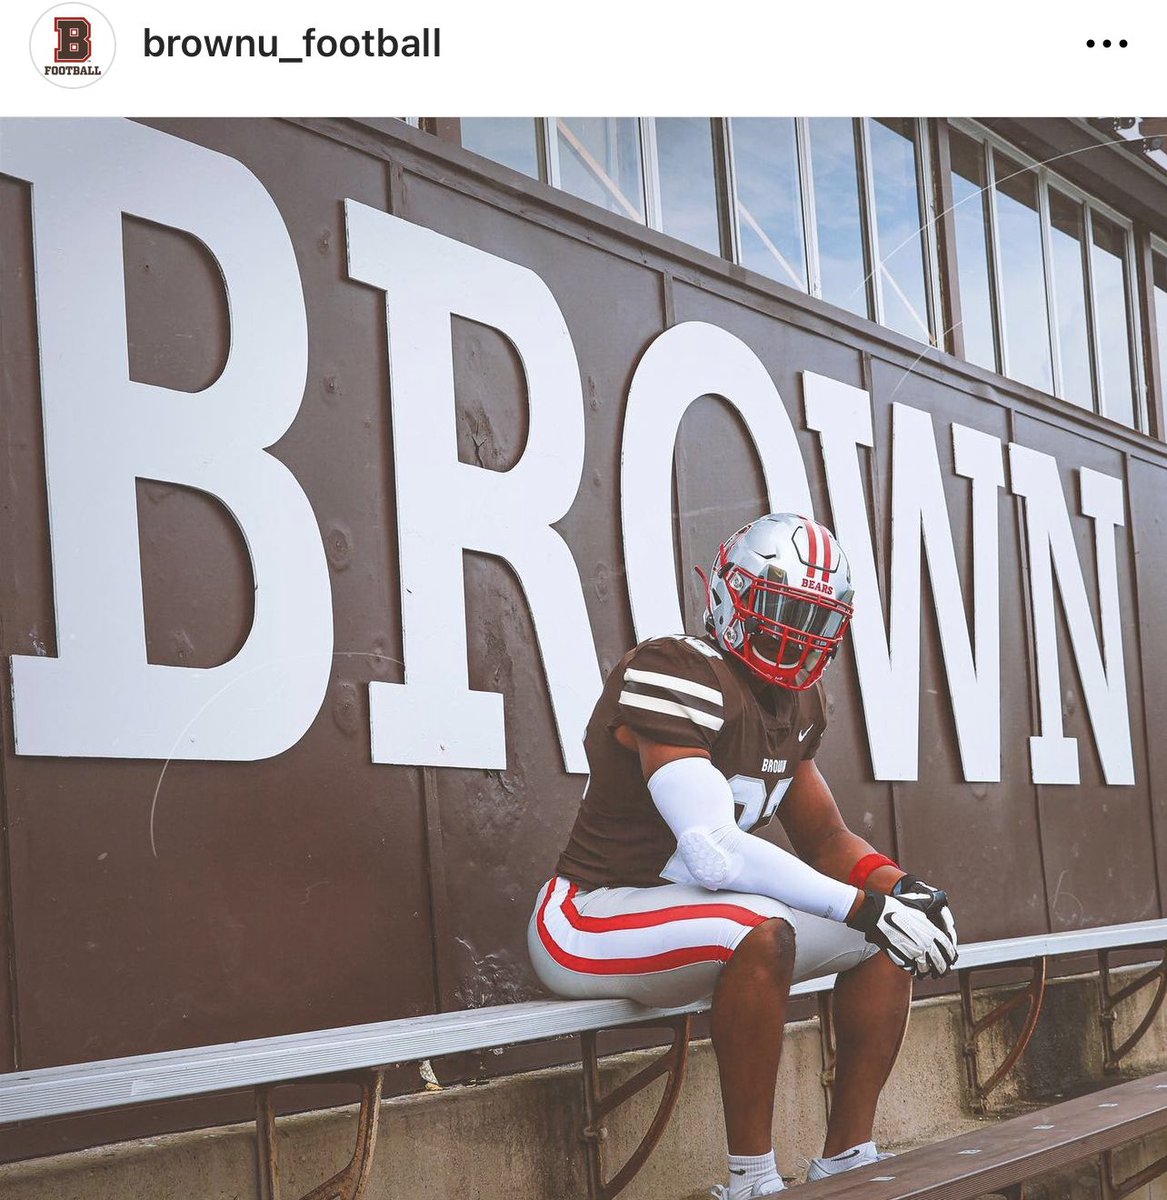 would like to thank @Browncoachweave and @BrownU_Football for a camp invite. @MattODonnell27 @BrownHCPerry @sjbcoachalba @coachJAlbaOC @tbev_jr @CoachTimAsbell @ericoutlaw100 @VinceCesar7454 @SJBDHSCougars @NCSA_Football @247recruiting @NCAA @PrepRedzoneNY @NYCHSFL